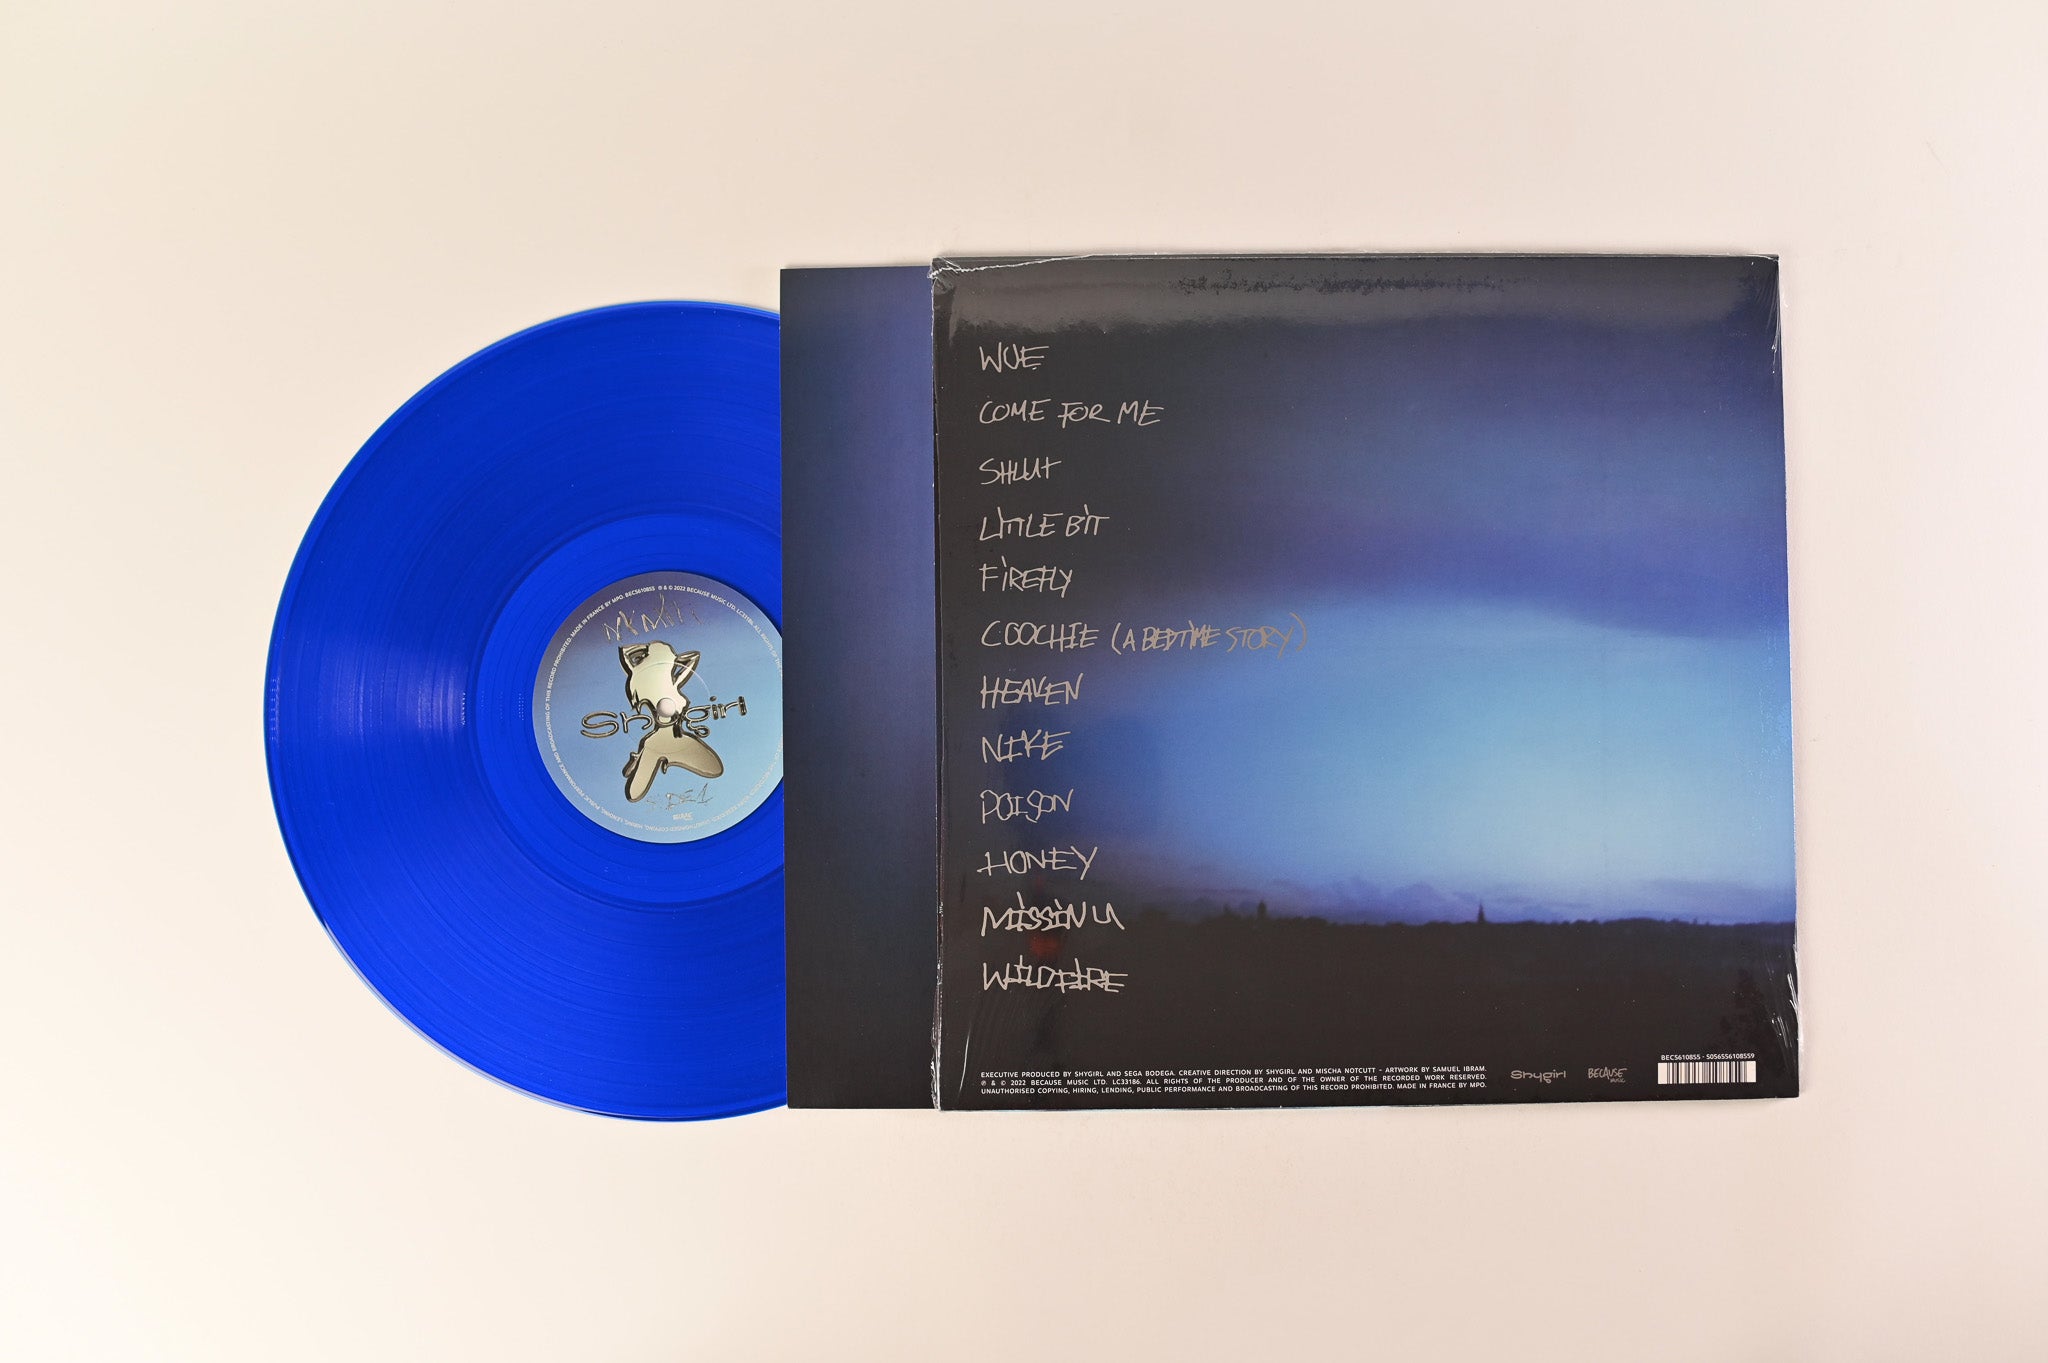 Shygirl - Nymph on Because Music Clear Blue Vinyl